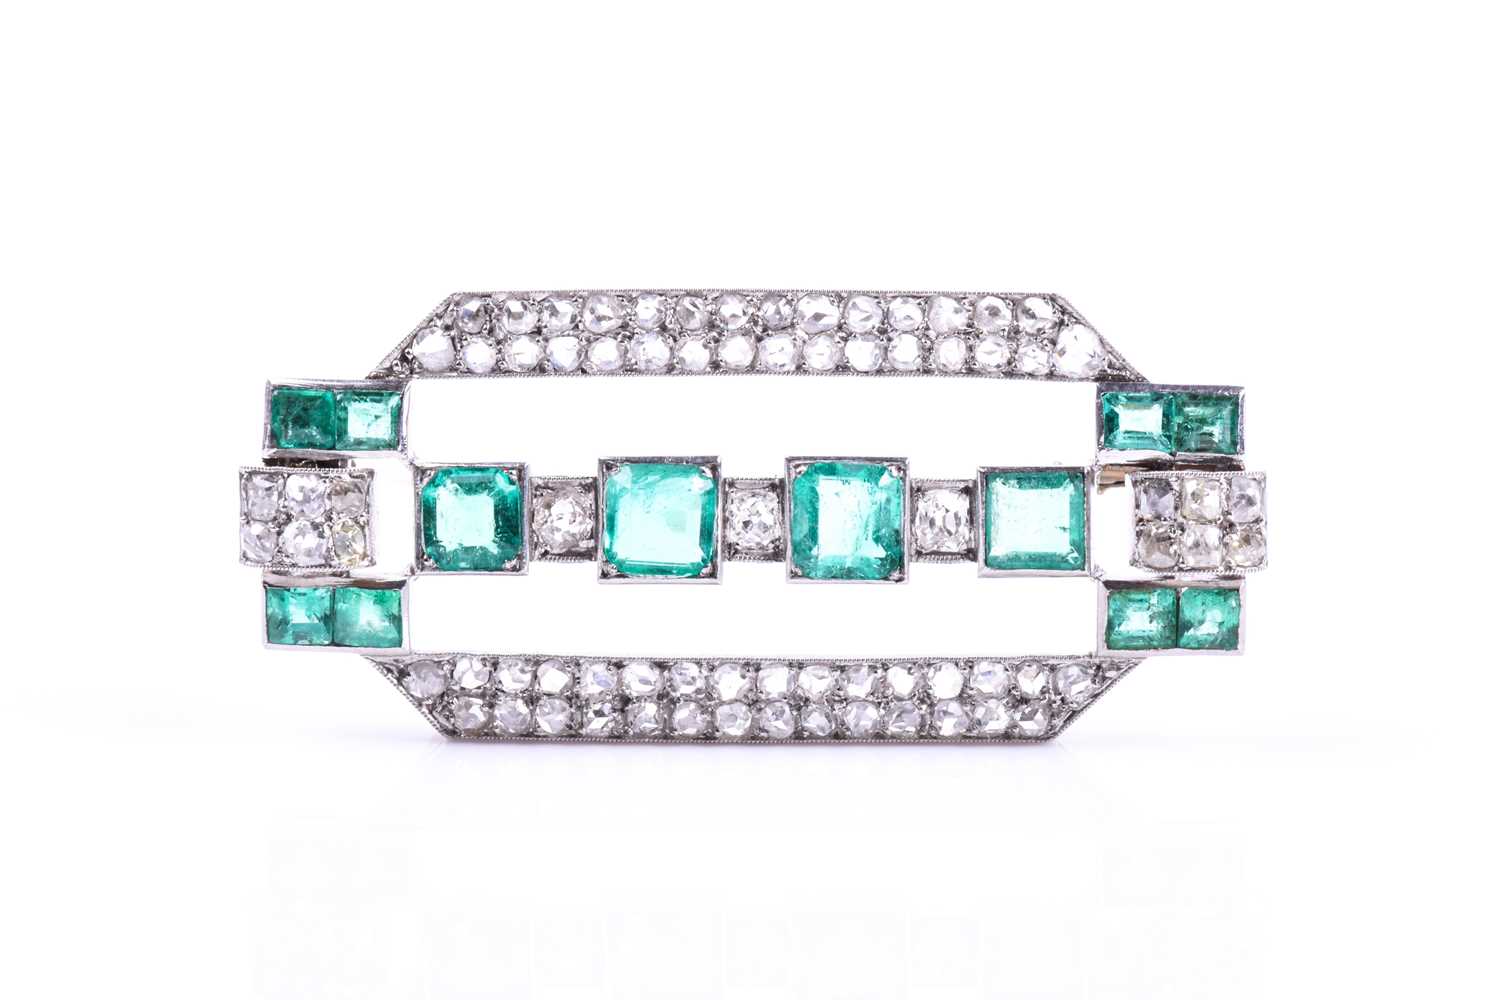 An Art Deco diamond and emerald broochthe rectangular mount inset with twelve emeralds (likely of